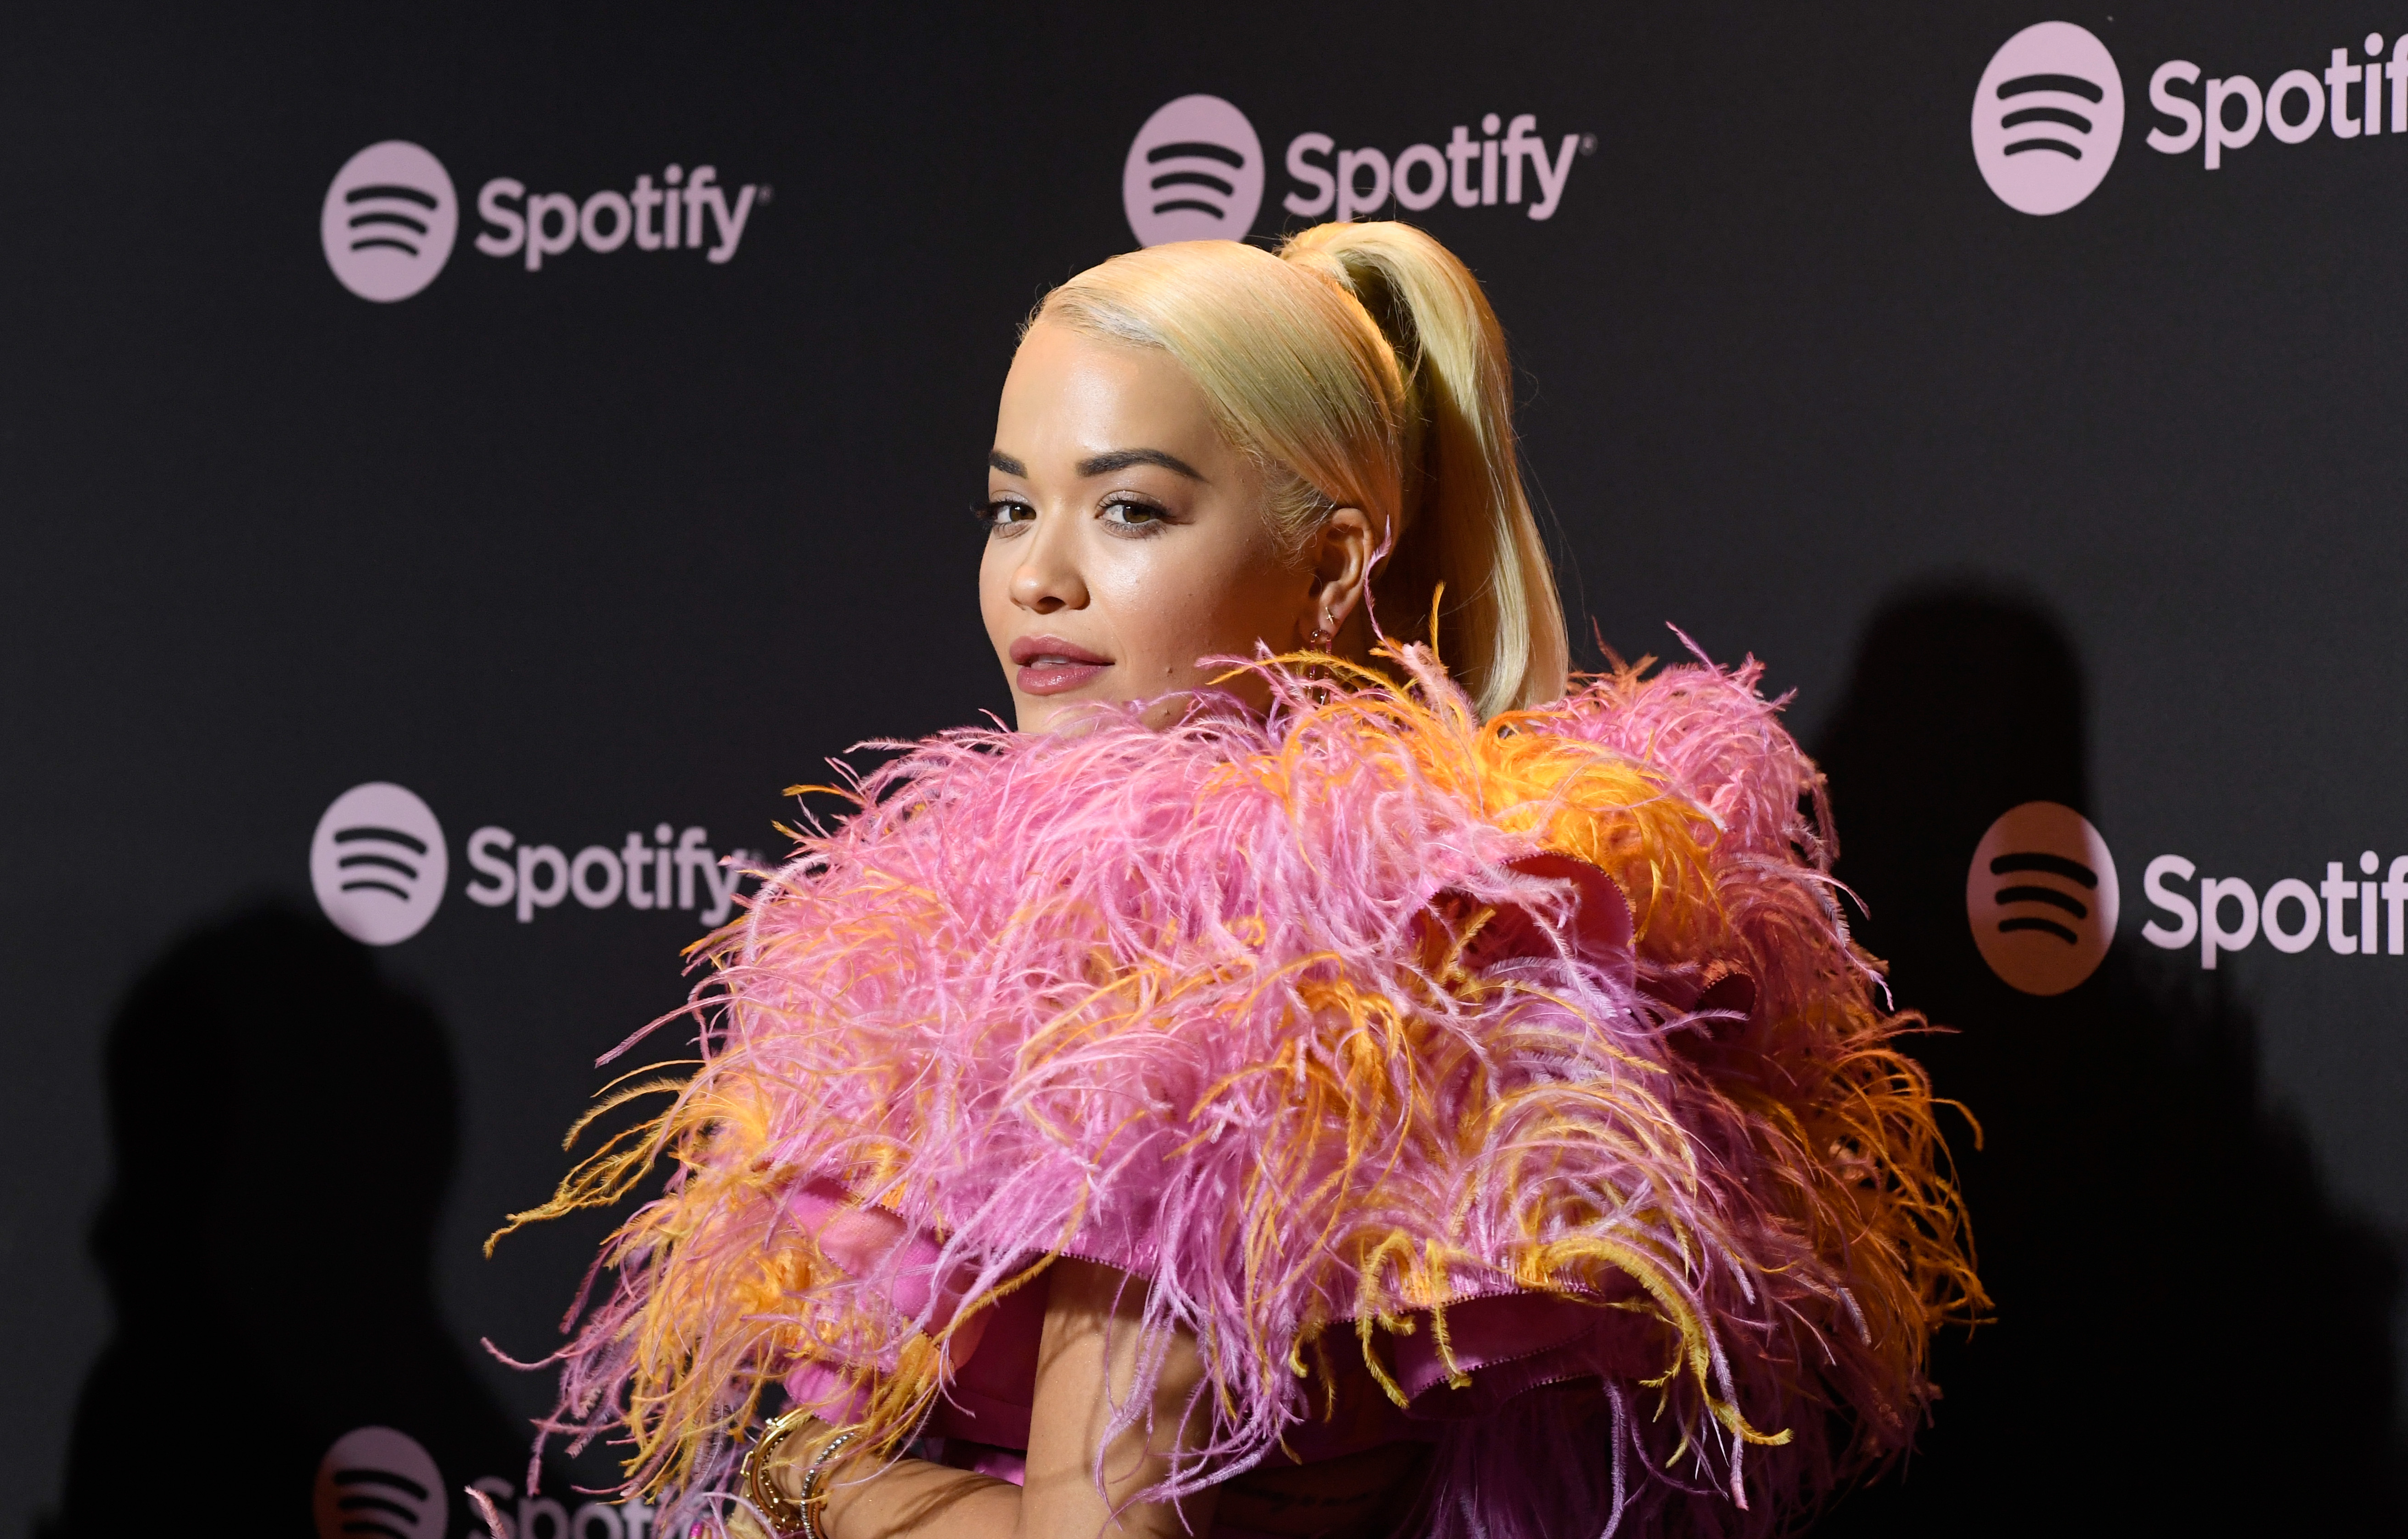 Rita Ora attends Spotify "Best New Artist 2019" event at Hammer Museum on February 7, 2019 in Los Angeles, California. (Photo by Frazer Harrison/Getty Images for Spotify)